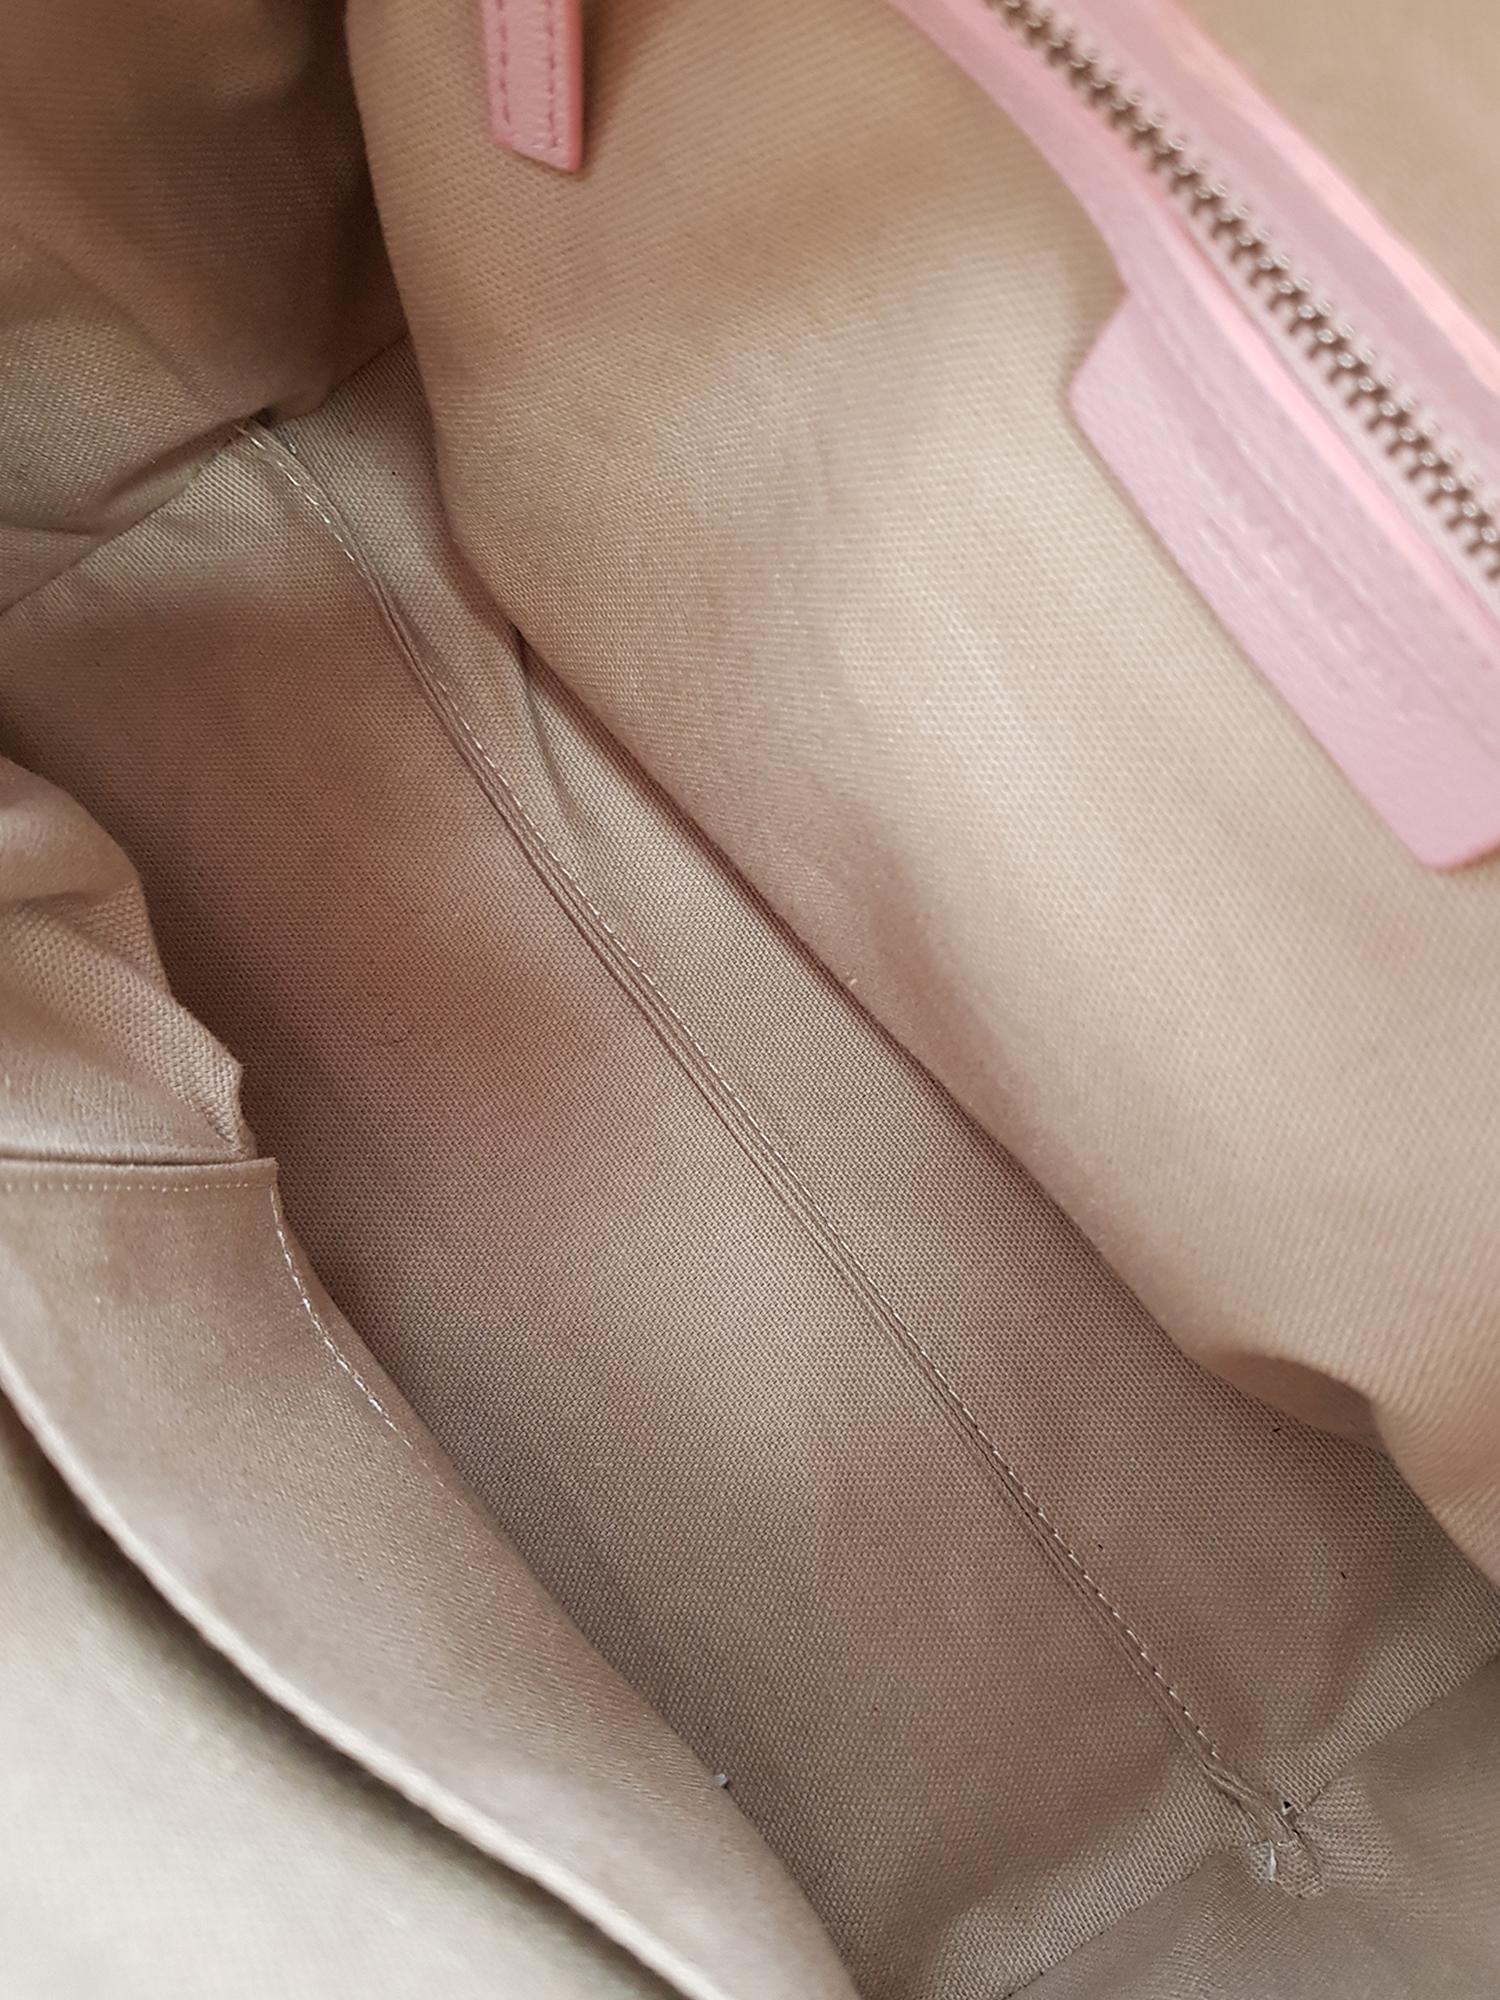 Givenchy  Women   Shoulder bags Antigona Pink Leather  In Excellent Condition For Sale In Milan, IT